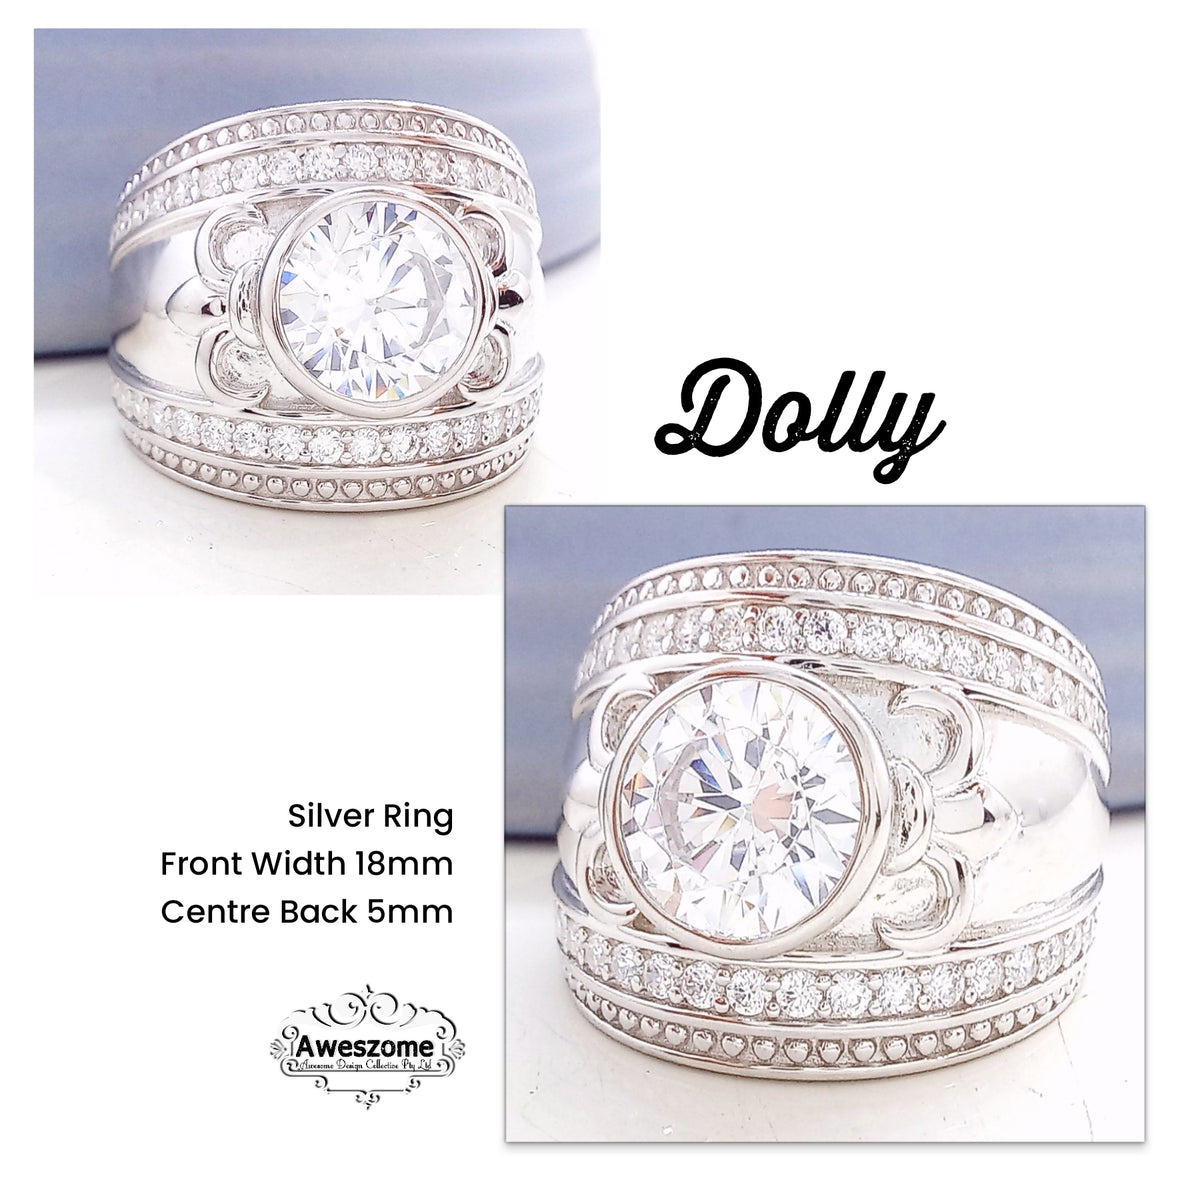 Silver Ring Dolly